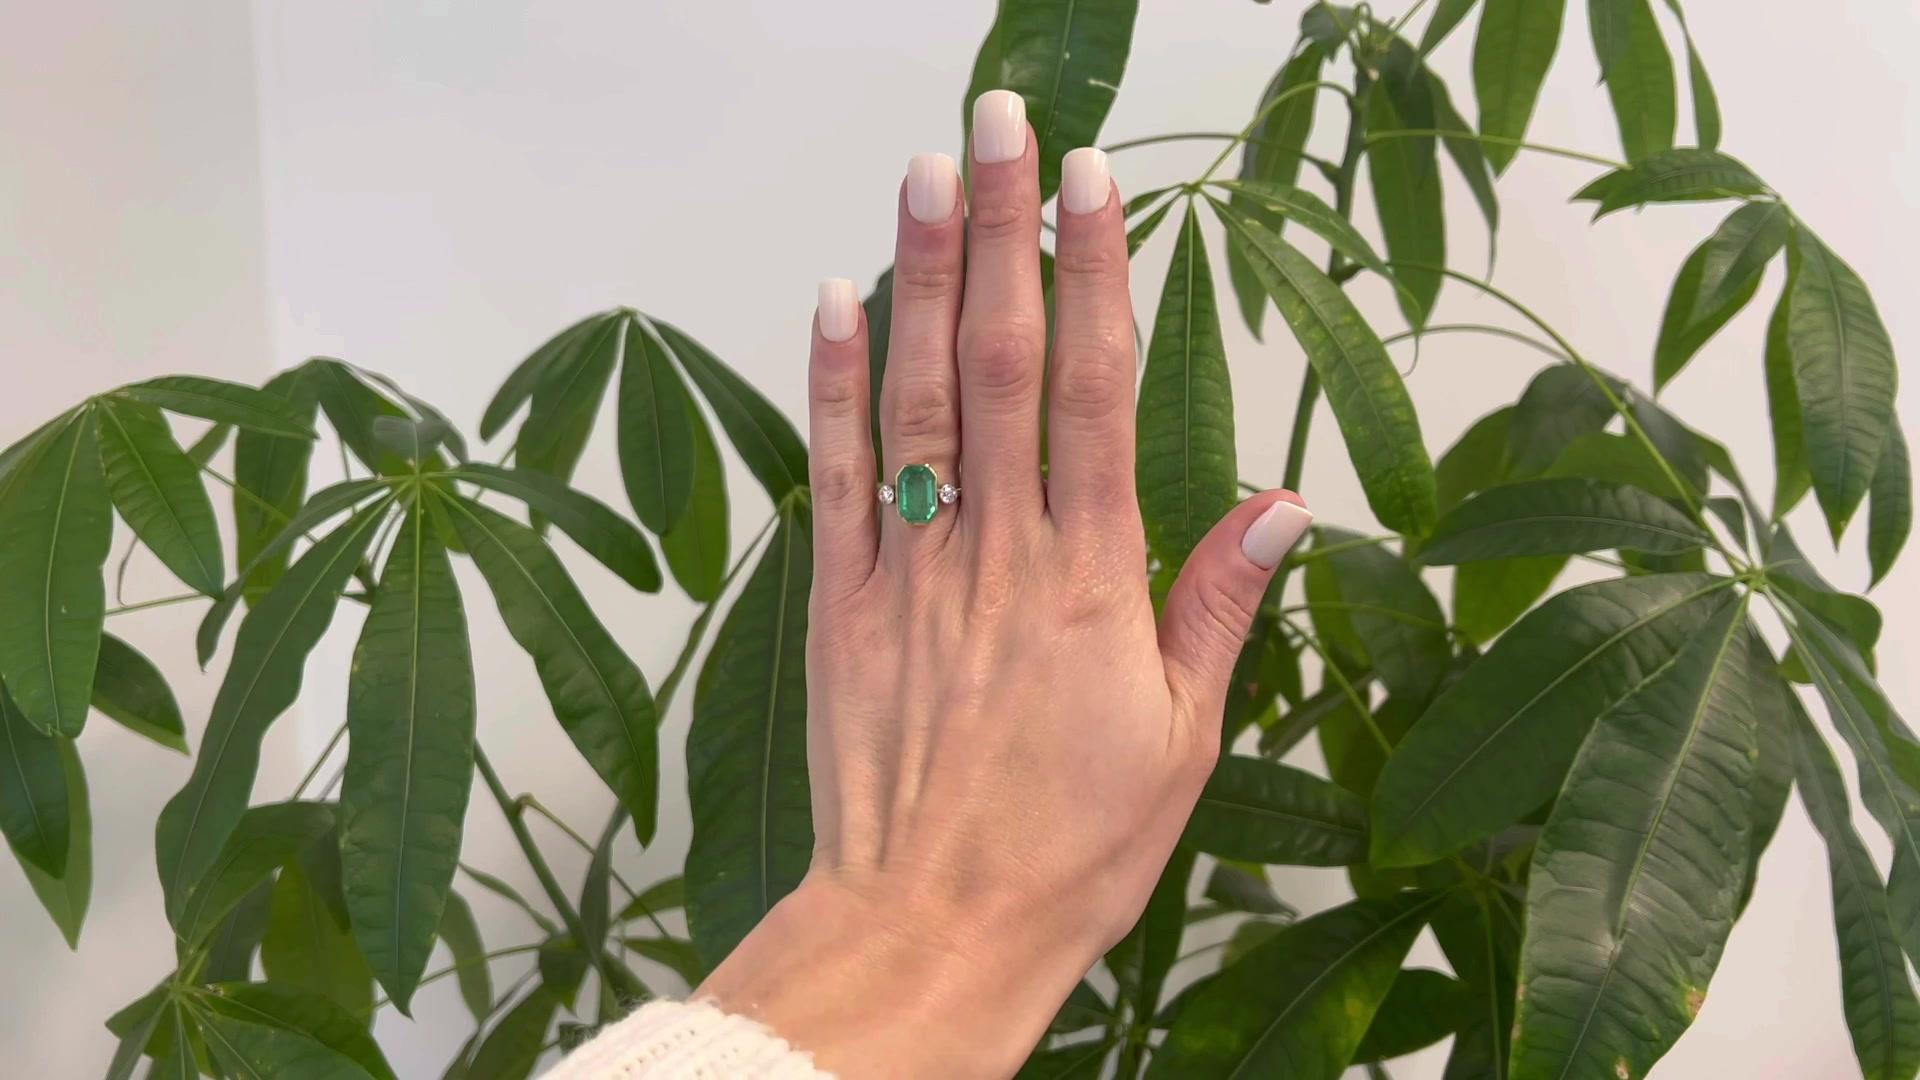 One Antique French GIA Russian Emerald Diamond 18k Yellow Gold Platinum Three Stone Ring. Featuring one octagonal step cut emerald weighing approximately 3.70 carats, accompanied with GIA #5221764342 stating the emerald is of Russian origin.